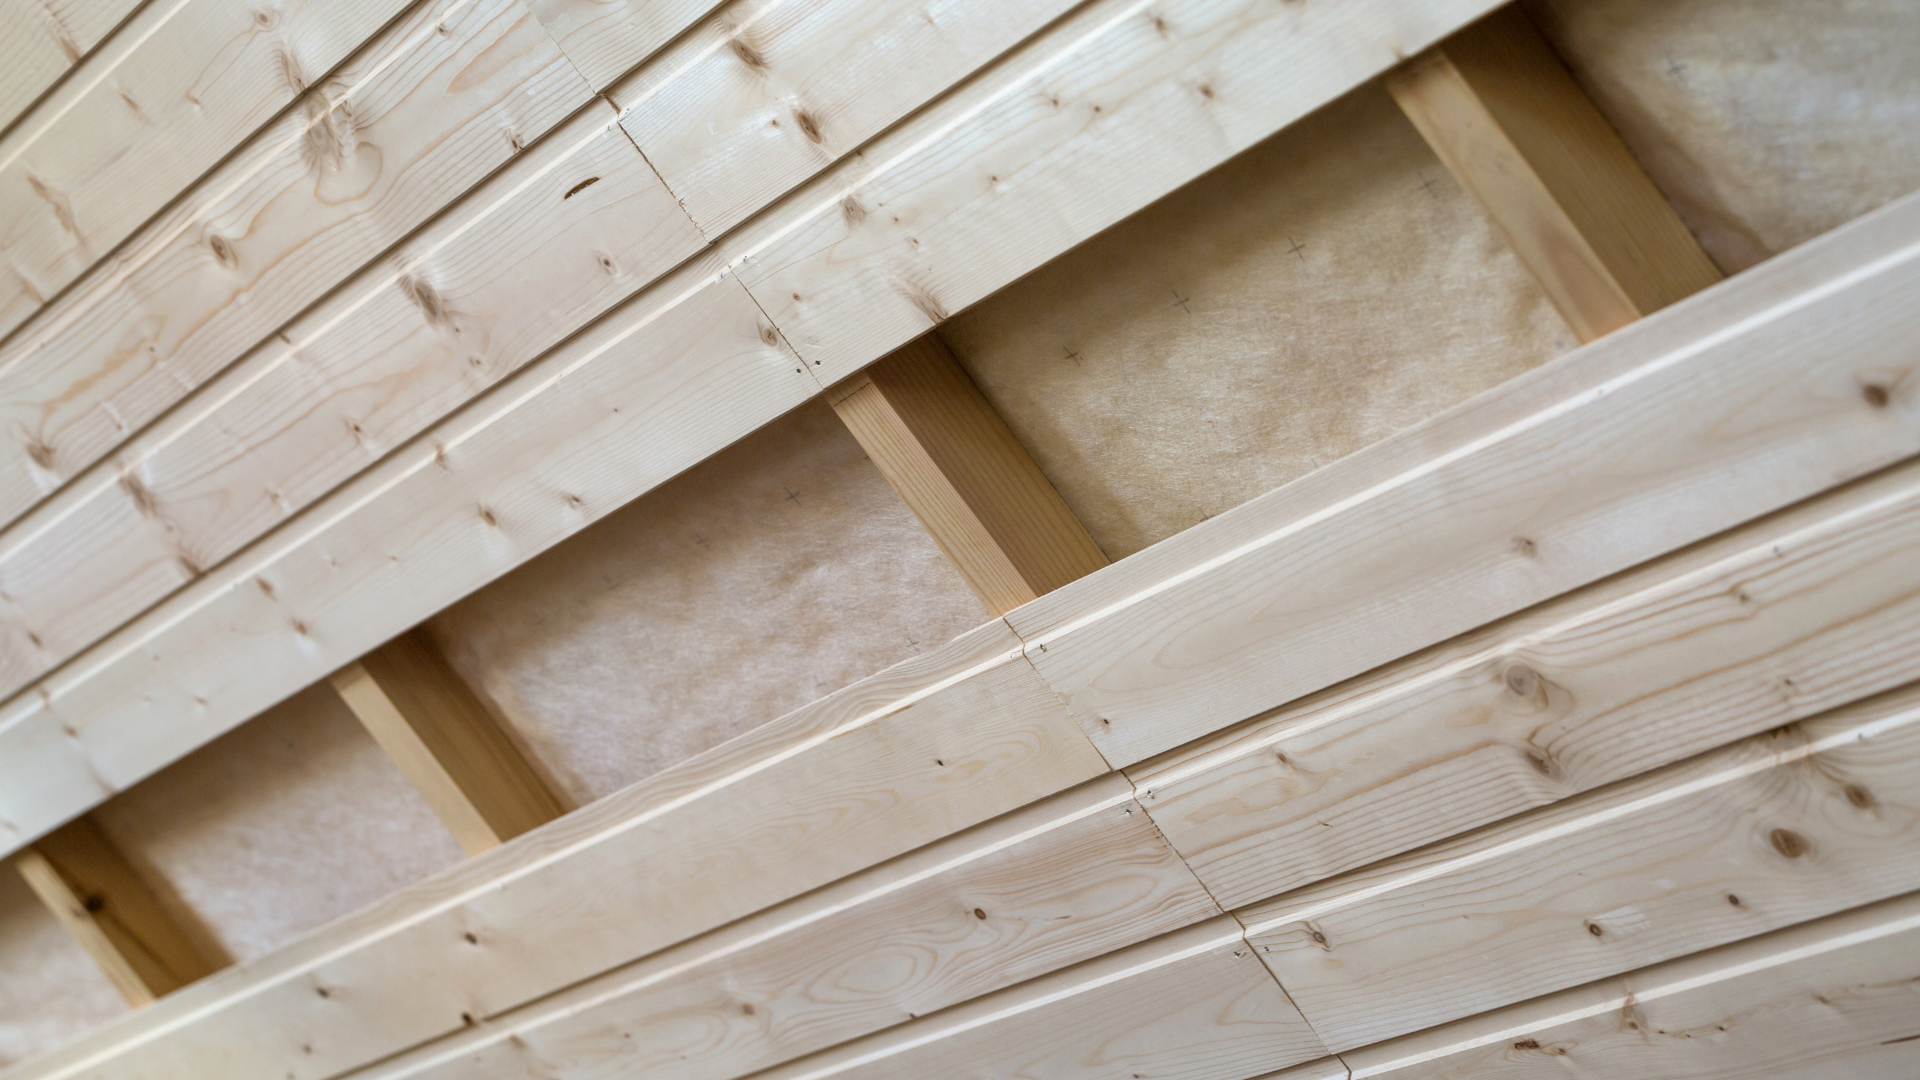 Cladding boards with a space in between